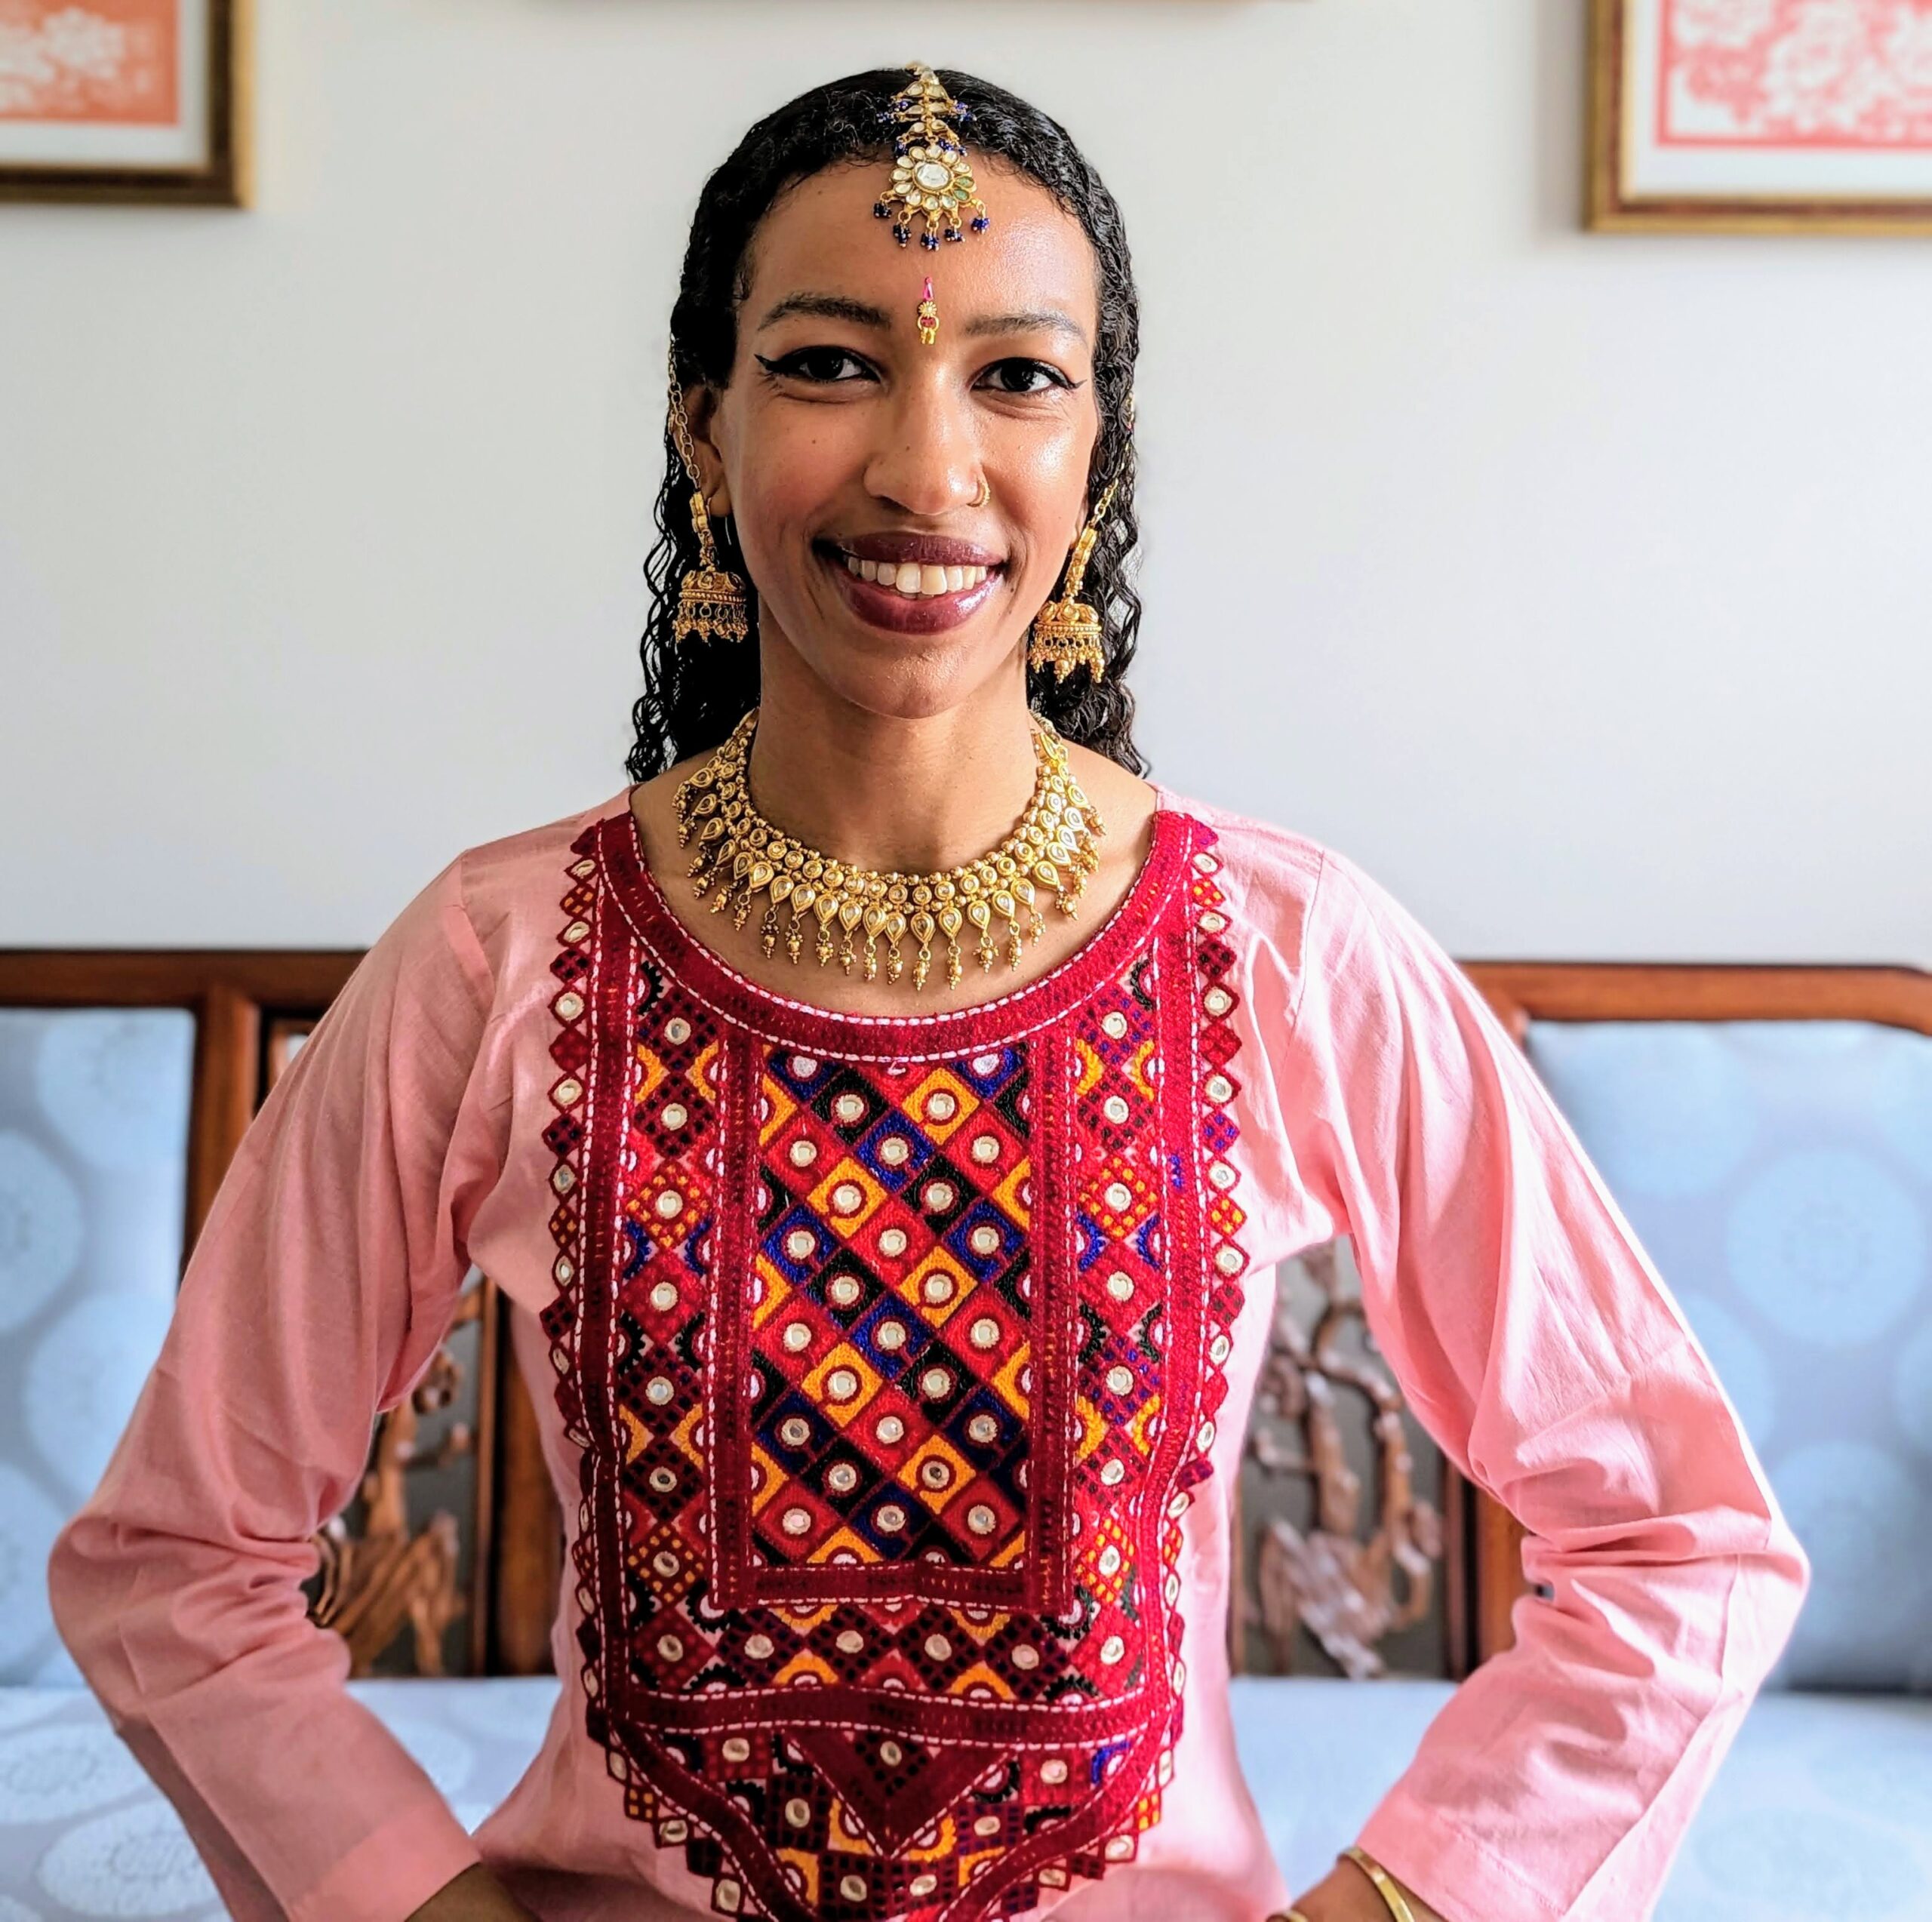 Tasherit Sturm Dahal in a pink Rajasthani costume posing for a portrait with gold Indian jewelry.